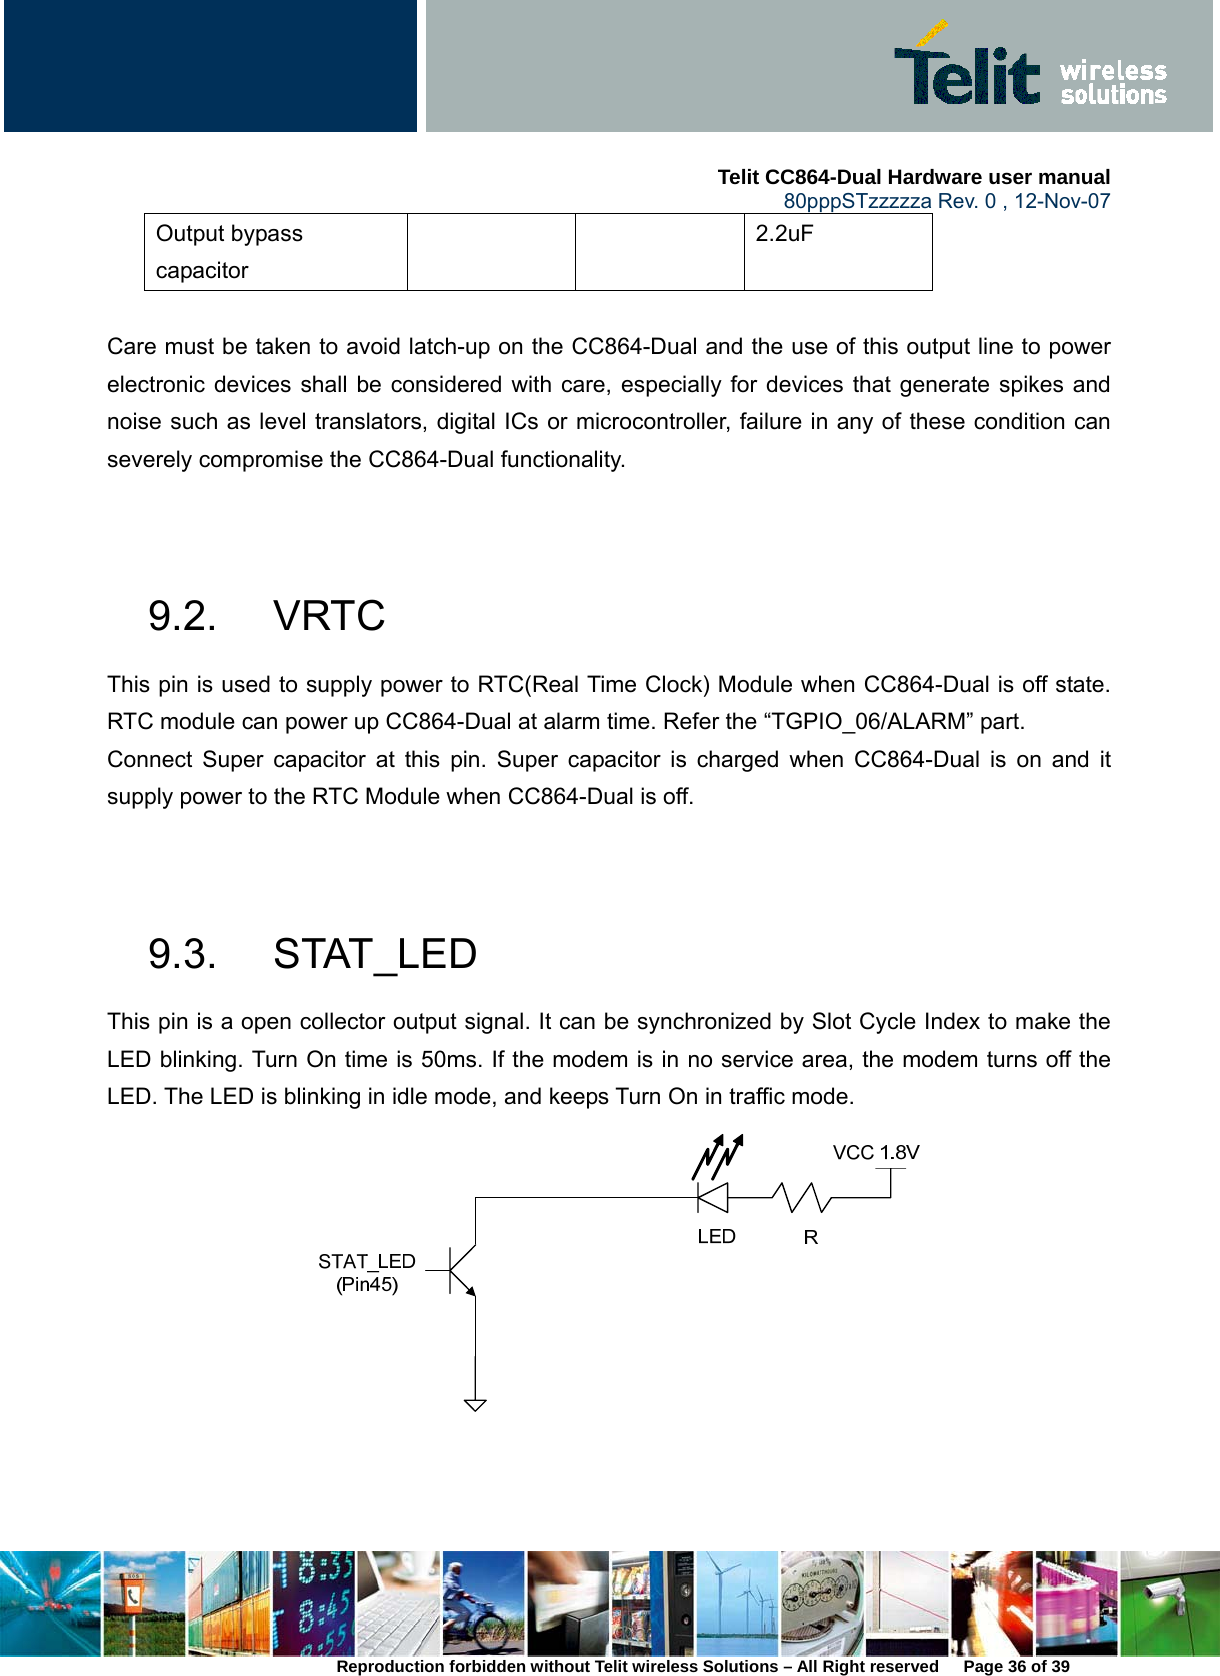     Telit CC864-Dual Hardware user manual   80pppSTzzzzza Rev. 0 , 12-Nov-07 Reproduction forbidden without Telit wireless Solutions – All Right reserved      Page 36 of 39 Output bypass capacitor   2.2uF  Care must be taken to avoid latch-up on the CC864-Dual and the use of this output line to power electronic devices shall be considered with care, especially for devices that generate spikes and noise such as level translators, digital ICs or microcontroller, failure in any of these condition can severely compromise the CC864-Dual functionality.     9.2. VRTC This pin is used to supply power to RTC(Real Time Clock) Module when CC864-Dual is off state. RTC module can power up CC864-Dual at alarm time. Refer the “TGPIO_06/ALARM” part. Connect Super capacitor at this pin. Super capacitor is charged when CC864-Dual is on and it supply power to the RTC Module when CC864-Dual is off.     9.3. STAT_LED This pin is a open collector output signal. It can be synchronized by Slot Cycle Index to make the LED blinking. Turn On time is 50ms. If the modem is in no service area, the modem turns off the LED. The LED is blinking in idle mode, and keeps Turn On in traffic mode.    